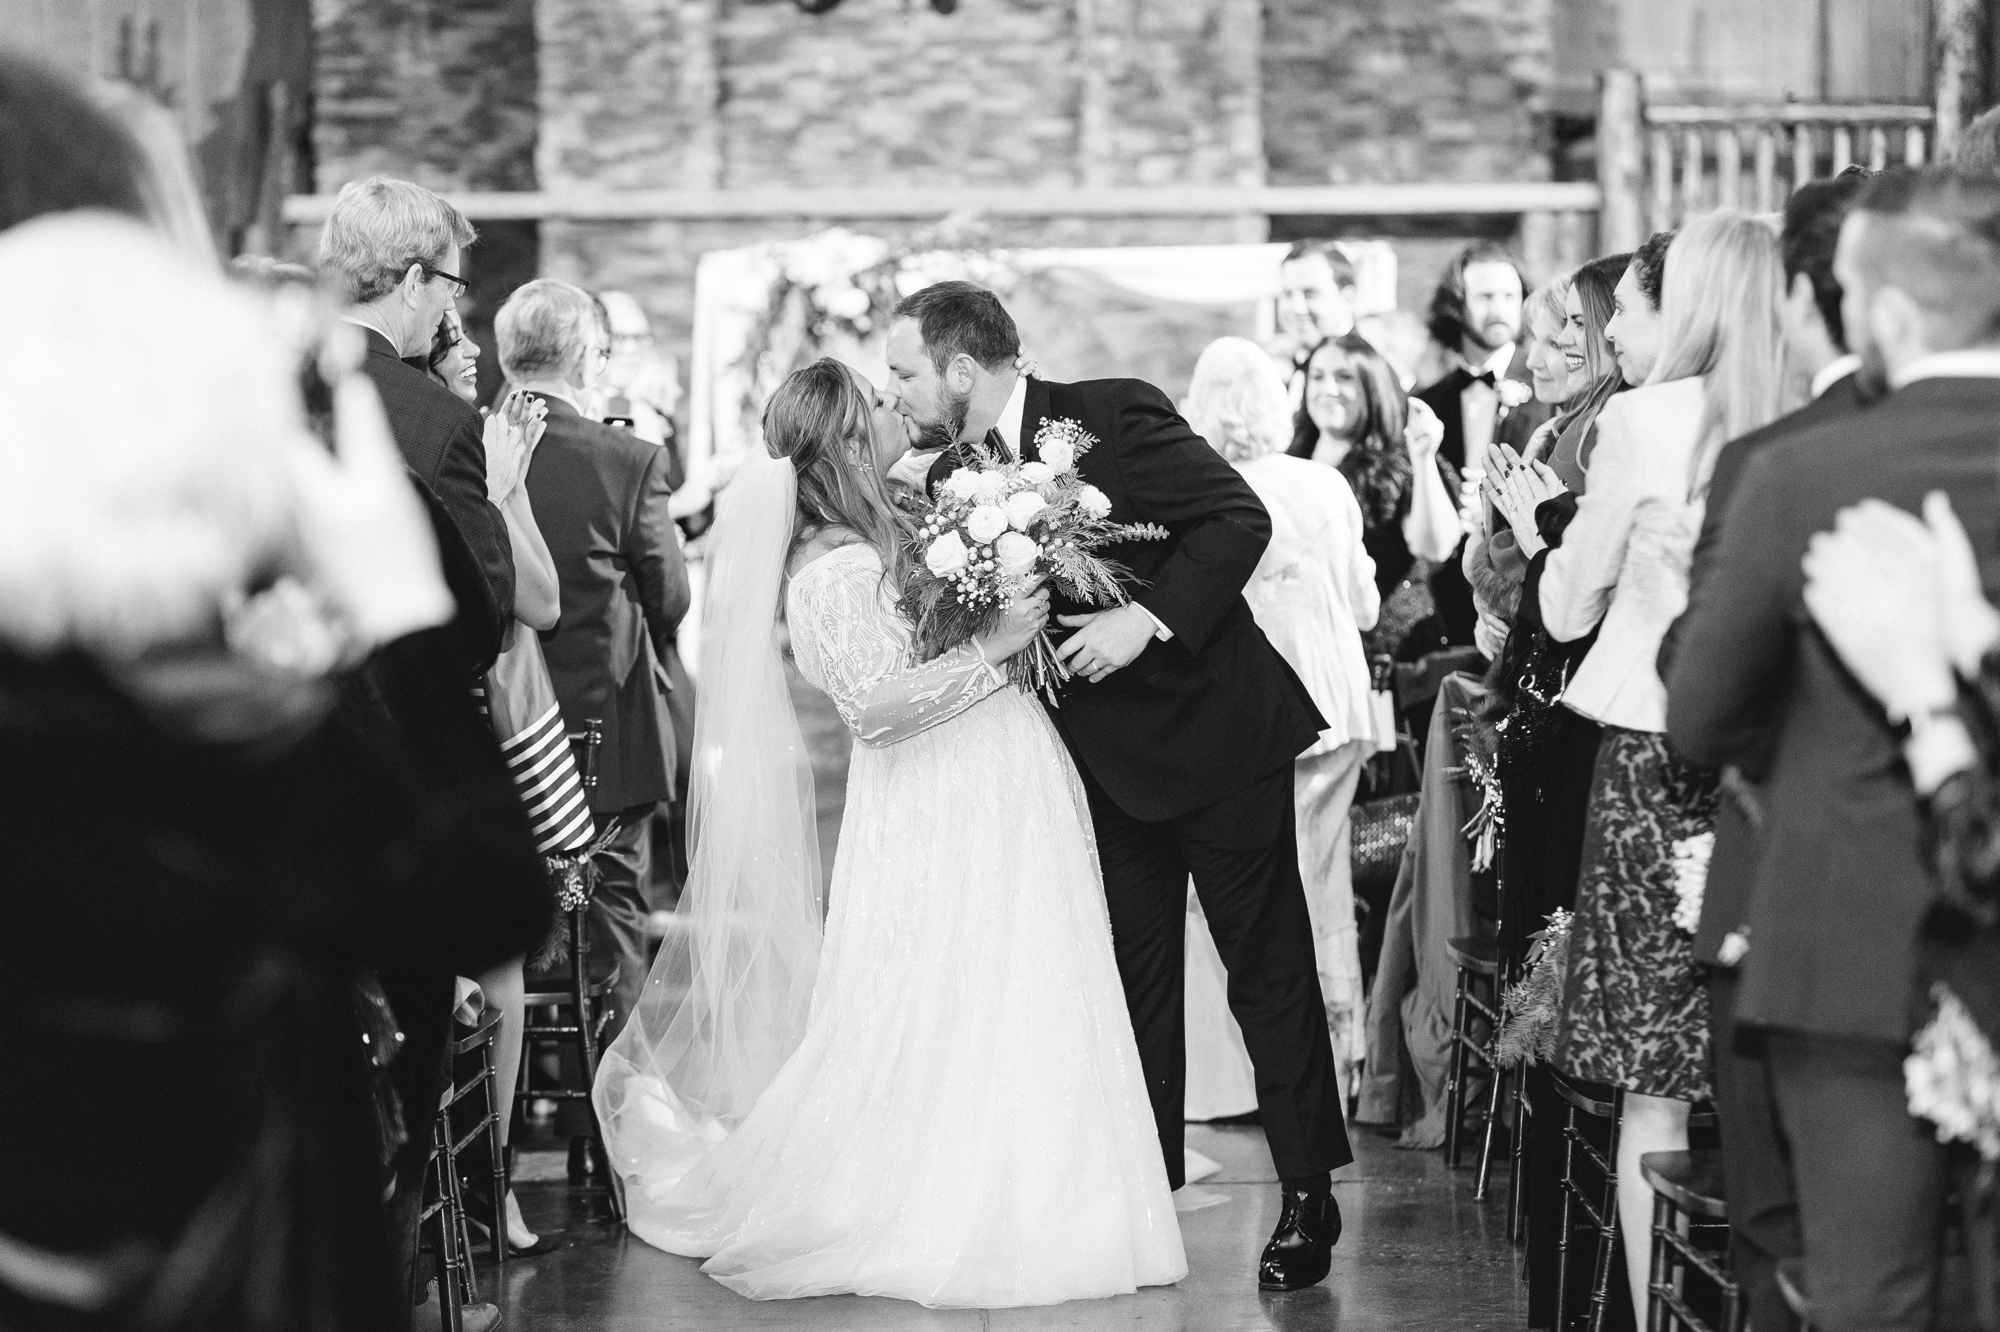 Indoor wedding ceremony at lower spruce mountain ranch winter wedding